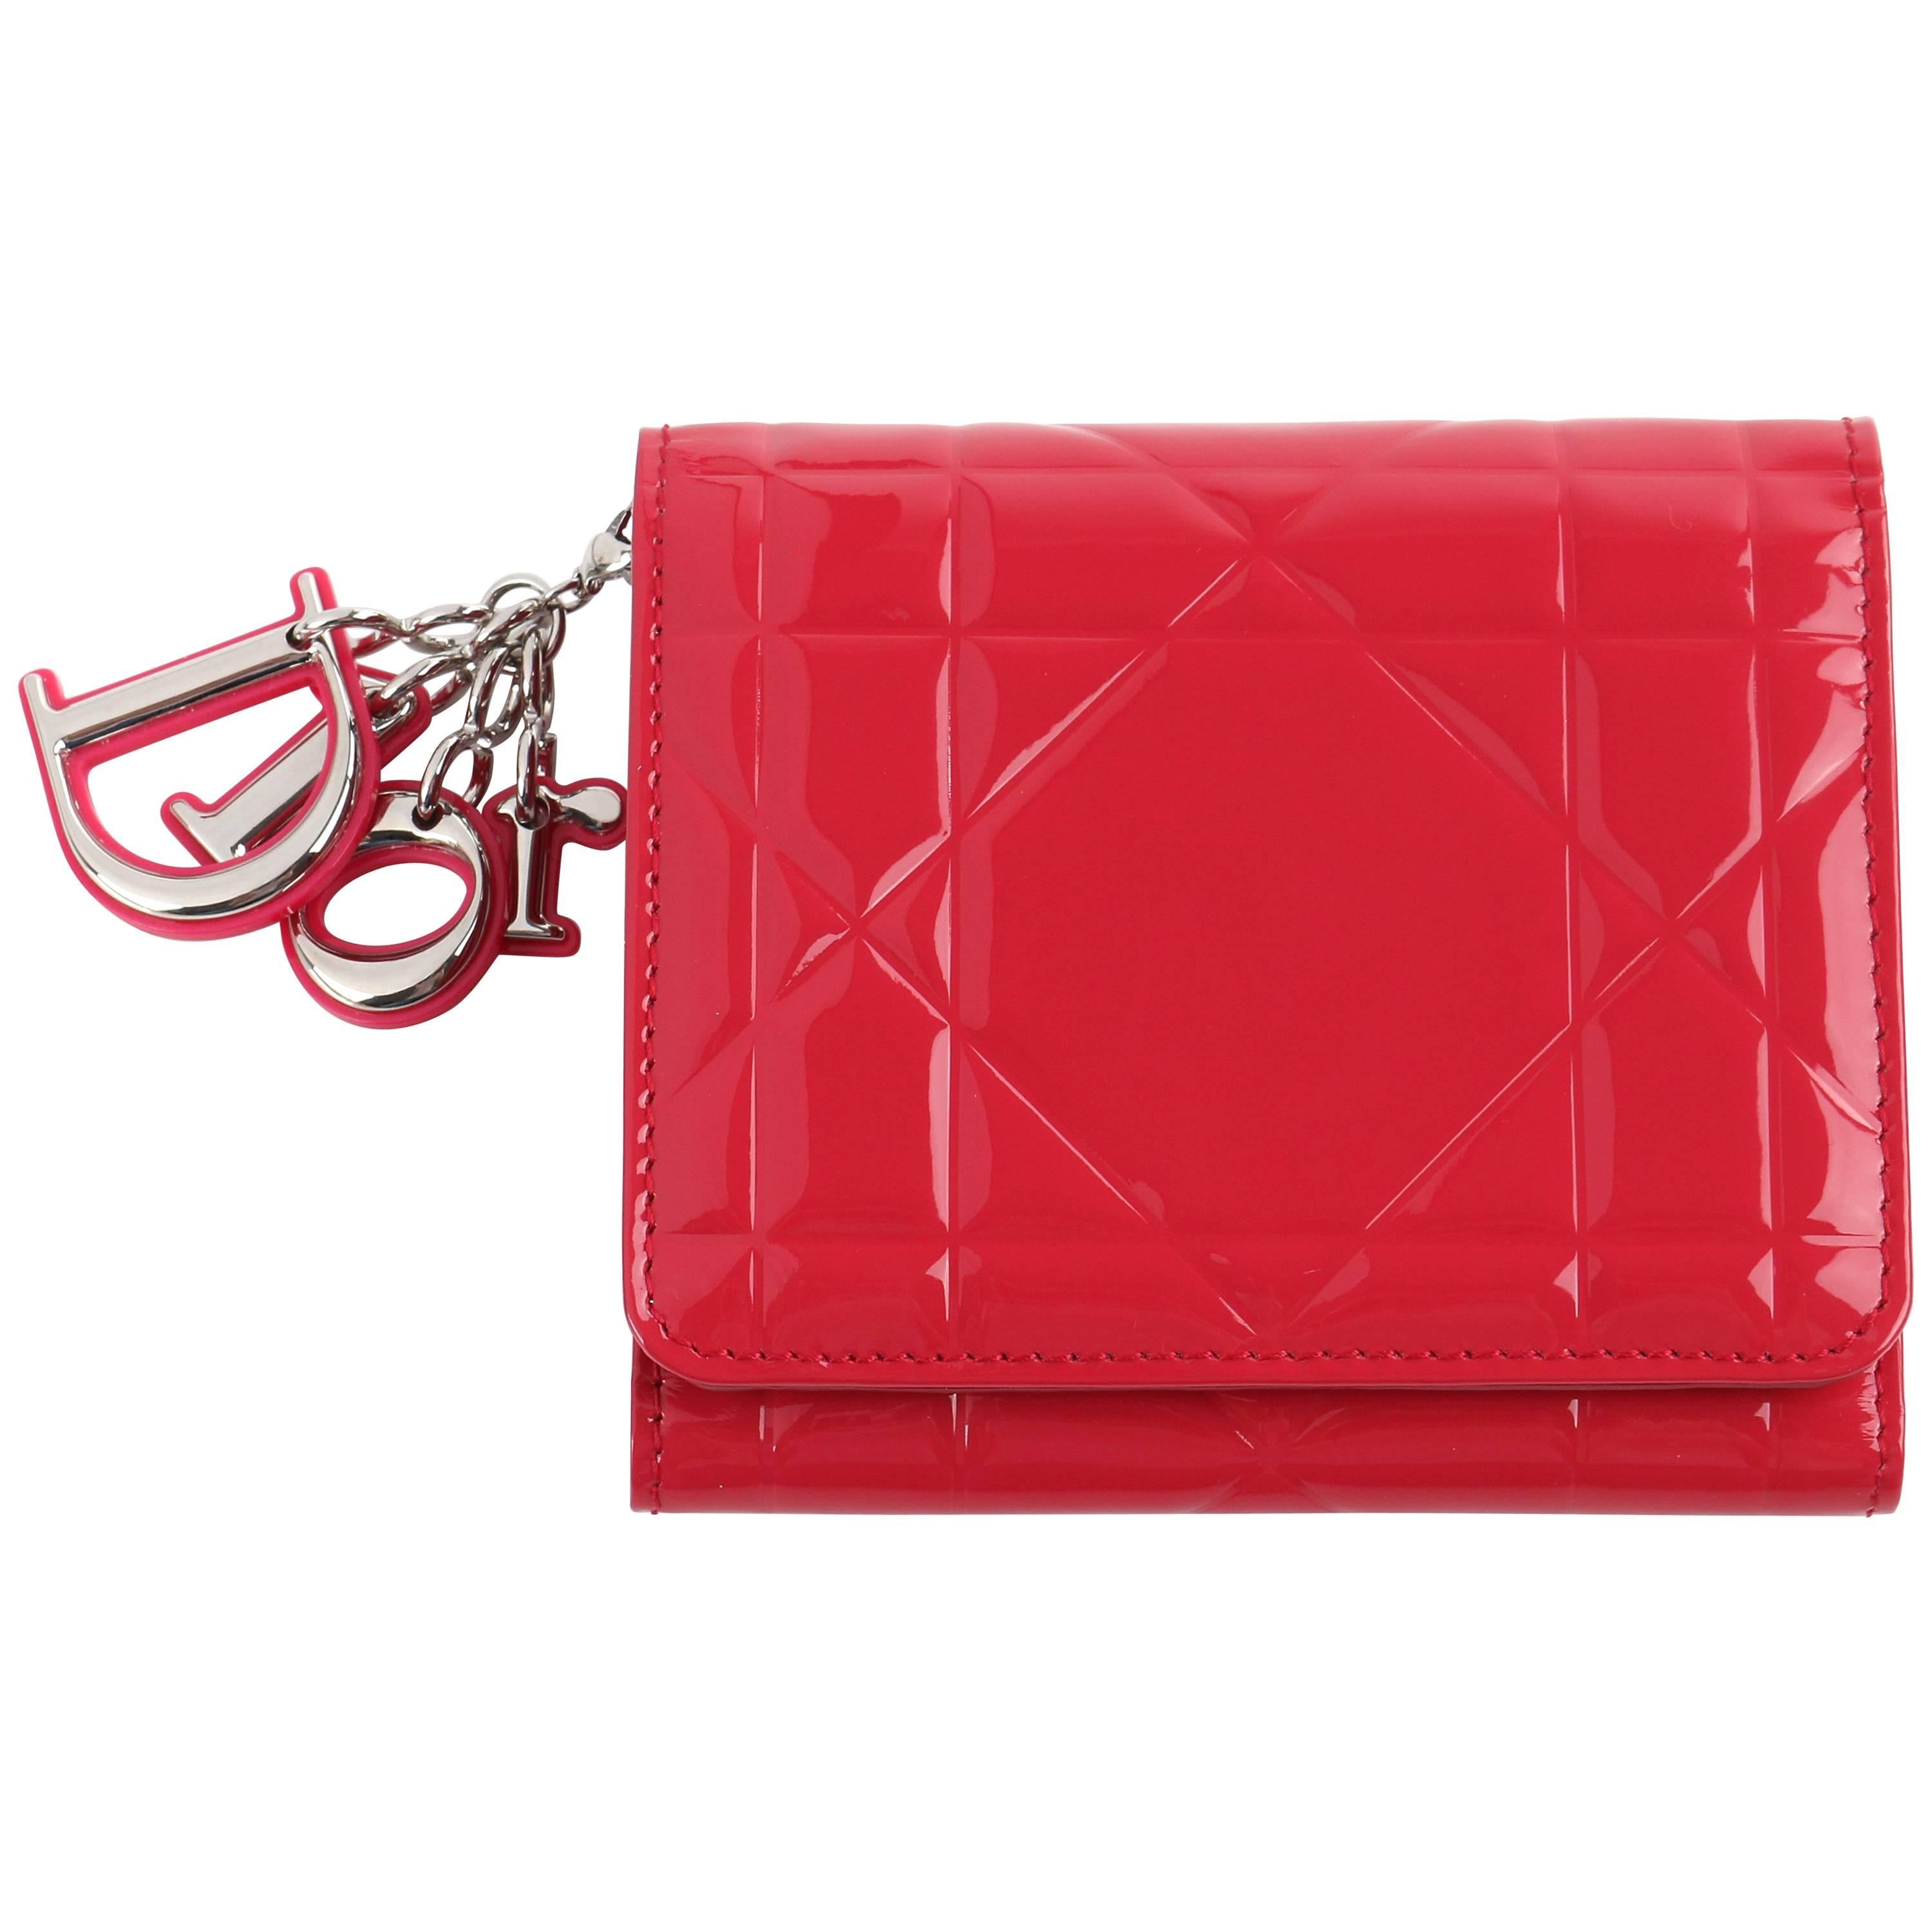 DIOR S/S 2012 "Tutti Dior" Fuchsia Pink Cannage Patent Leather Tri-fold Wallet